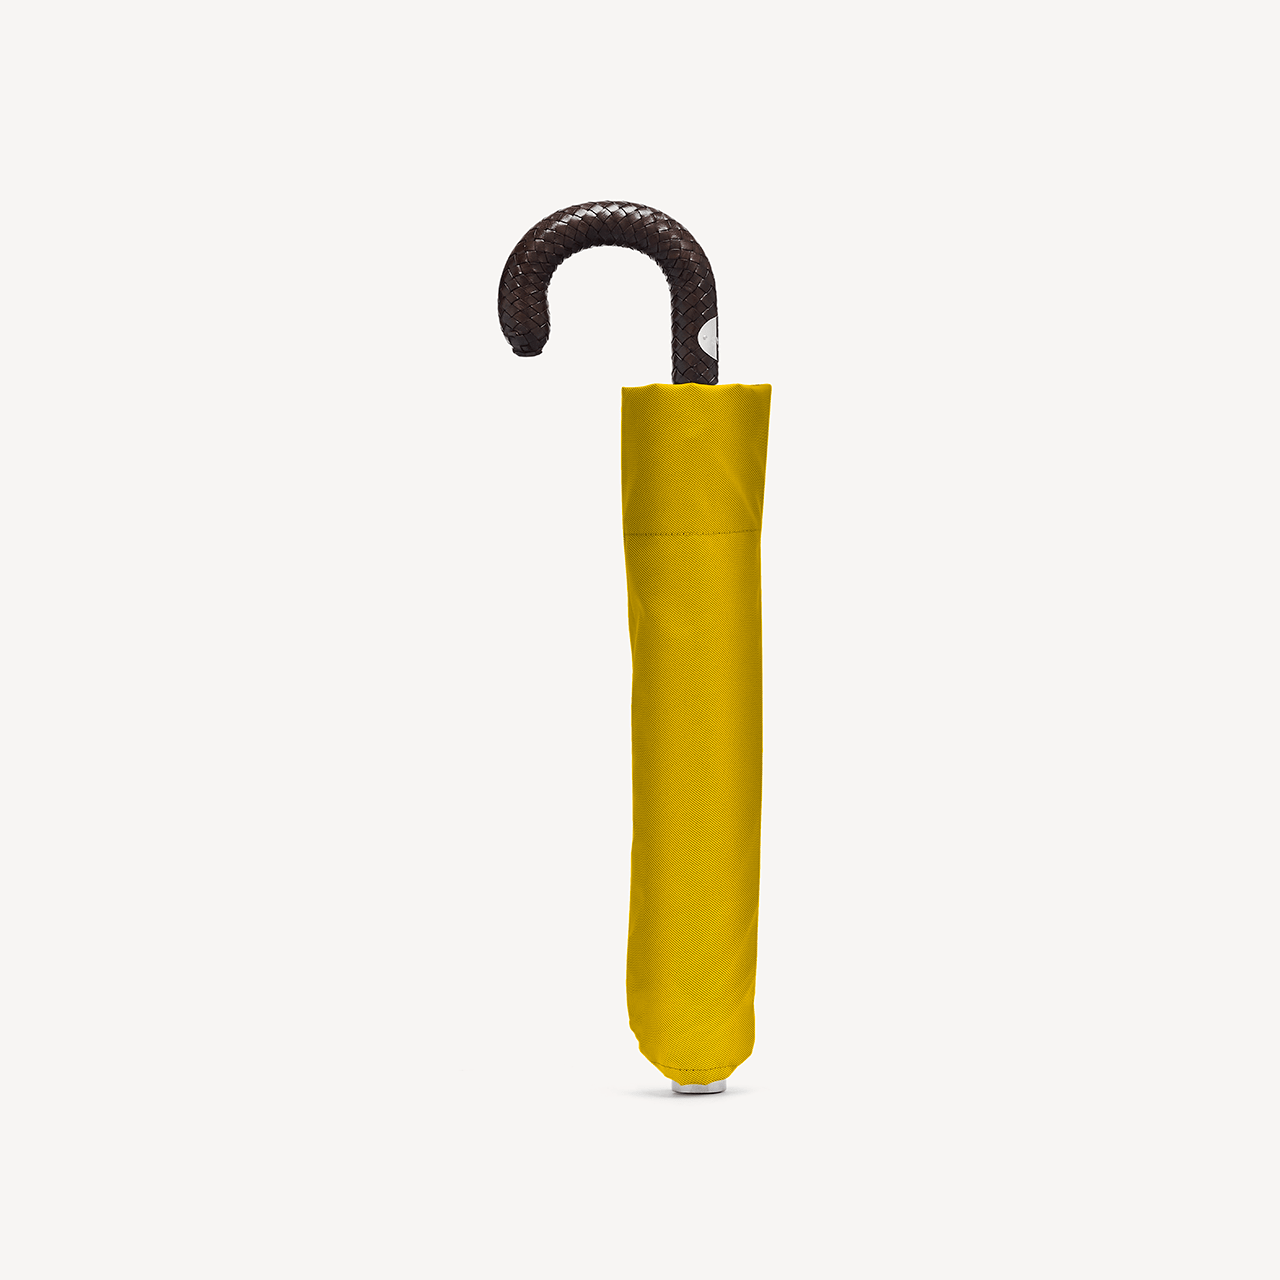 Collapsible Umbrella with Braided Leather Handle - Mustard - Swaine